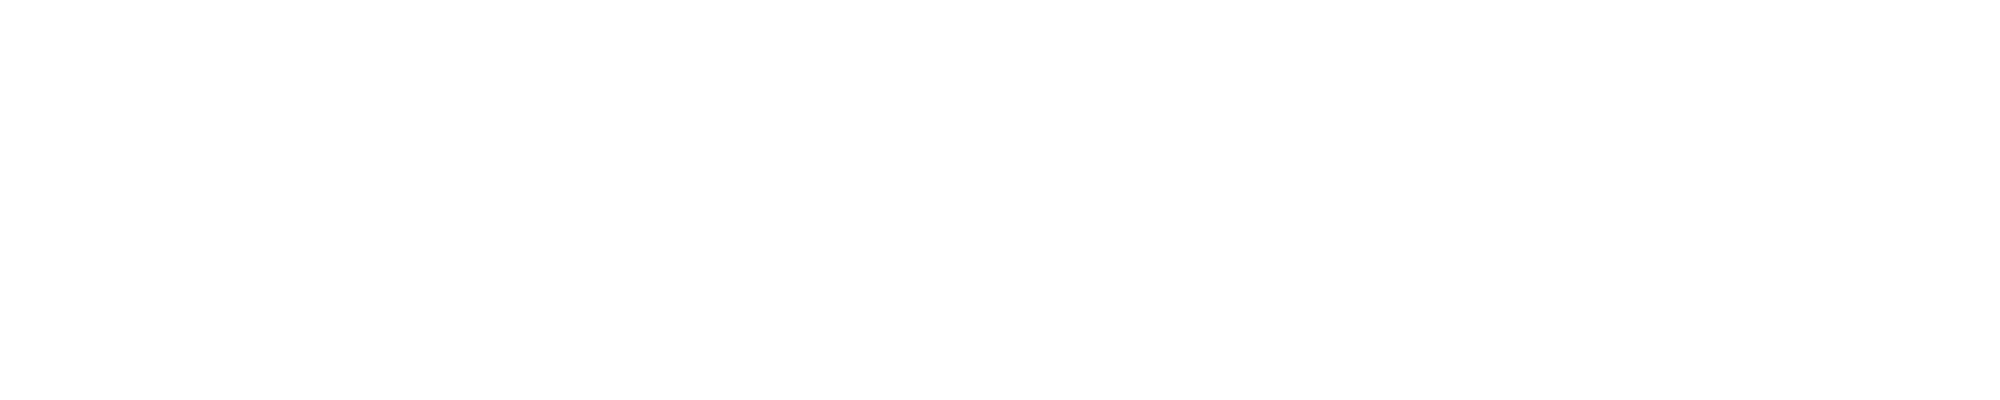 PT. Amanah Putra Pratama - Indonesian Migrant Worker Placement Company